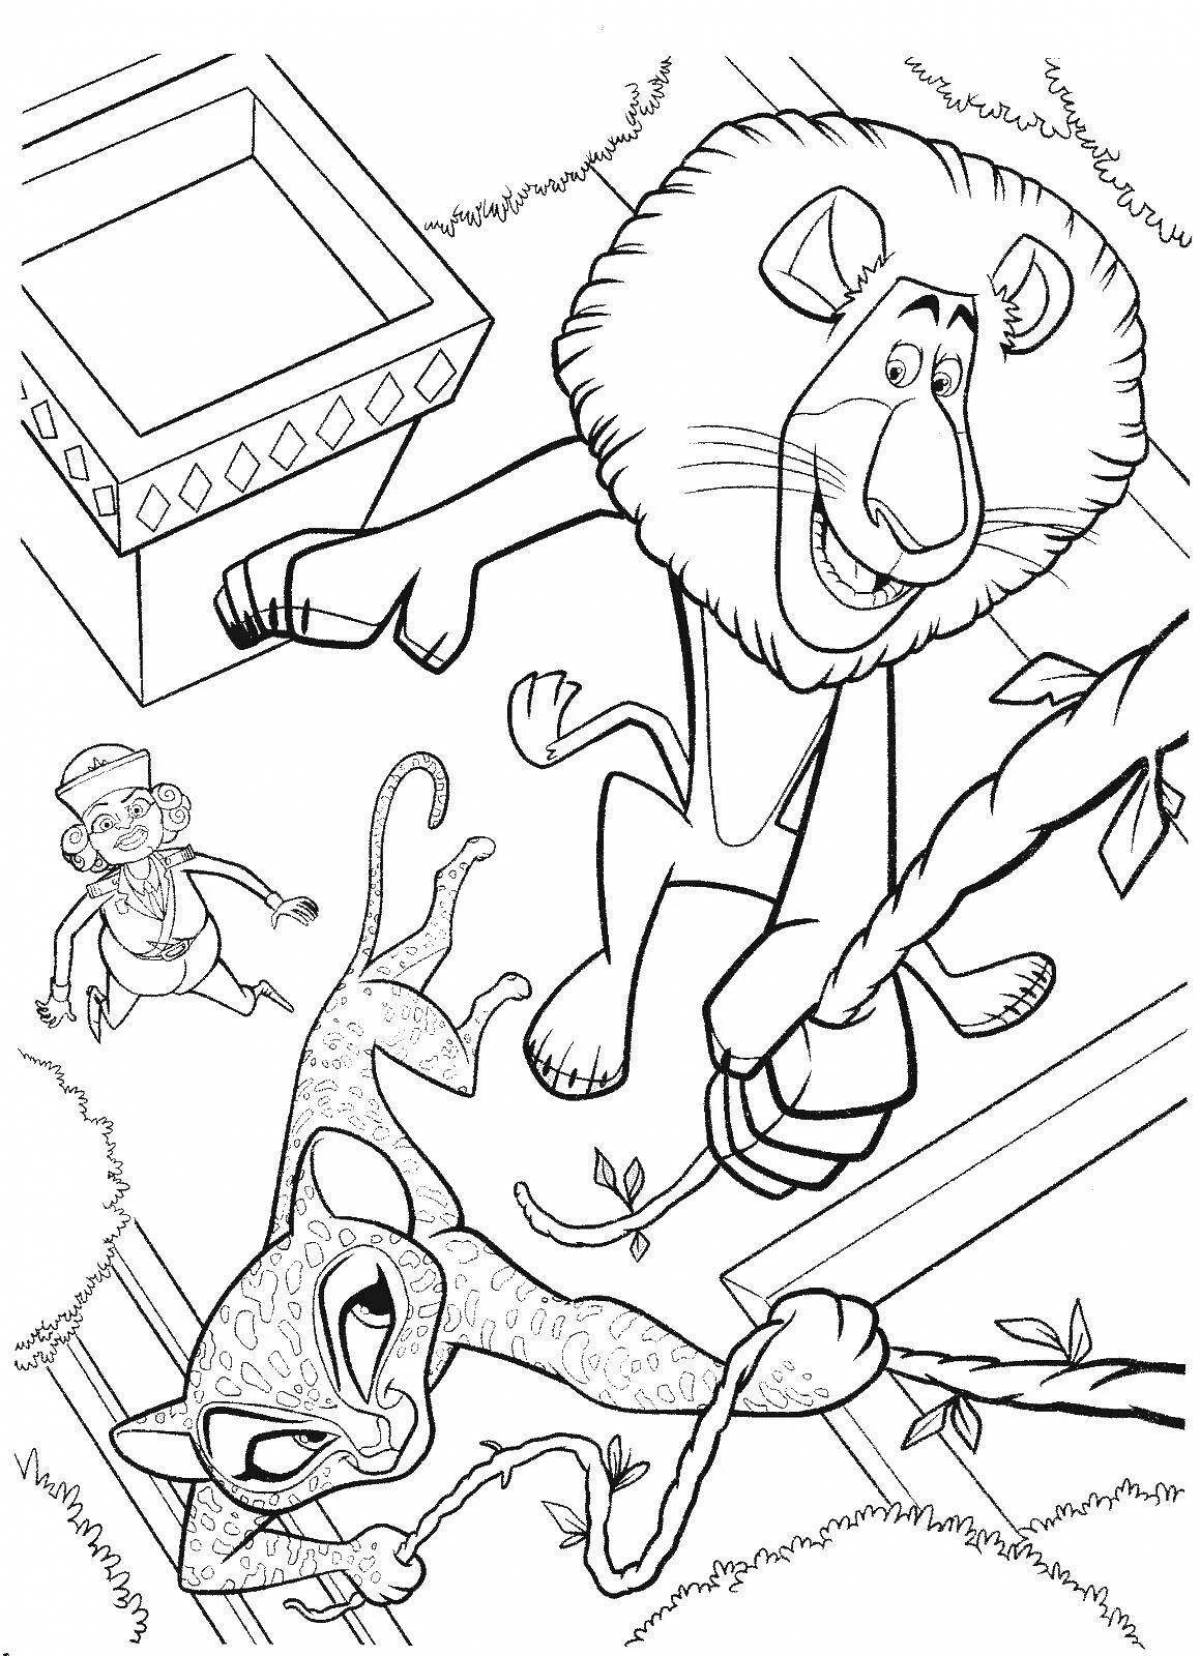 Coloring page charming madagascar 3